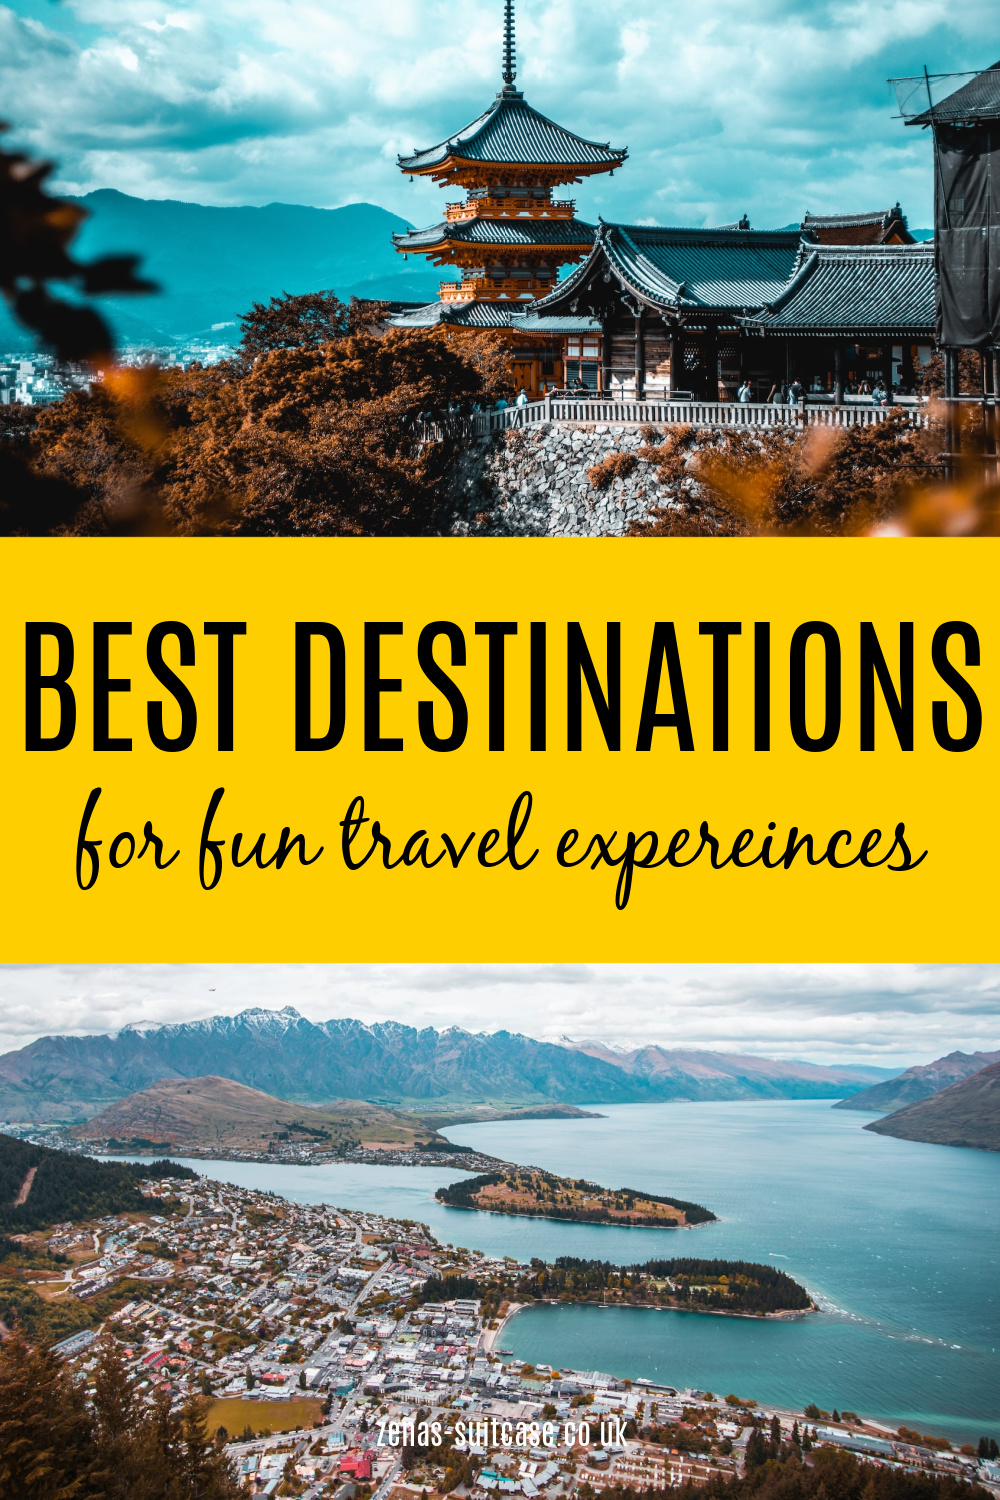 The best destinations for fun travel experiences 